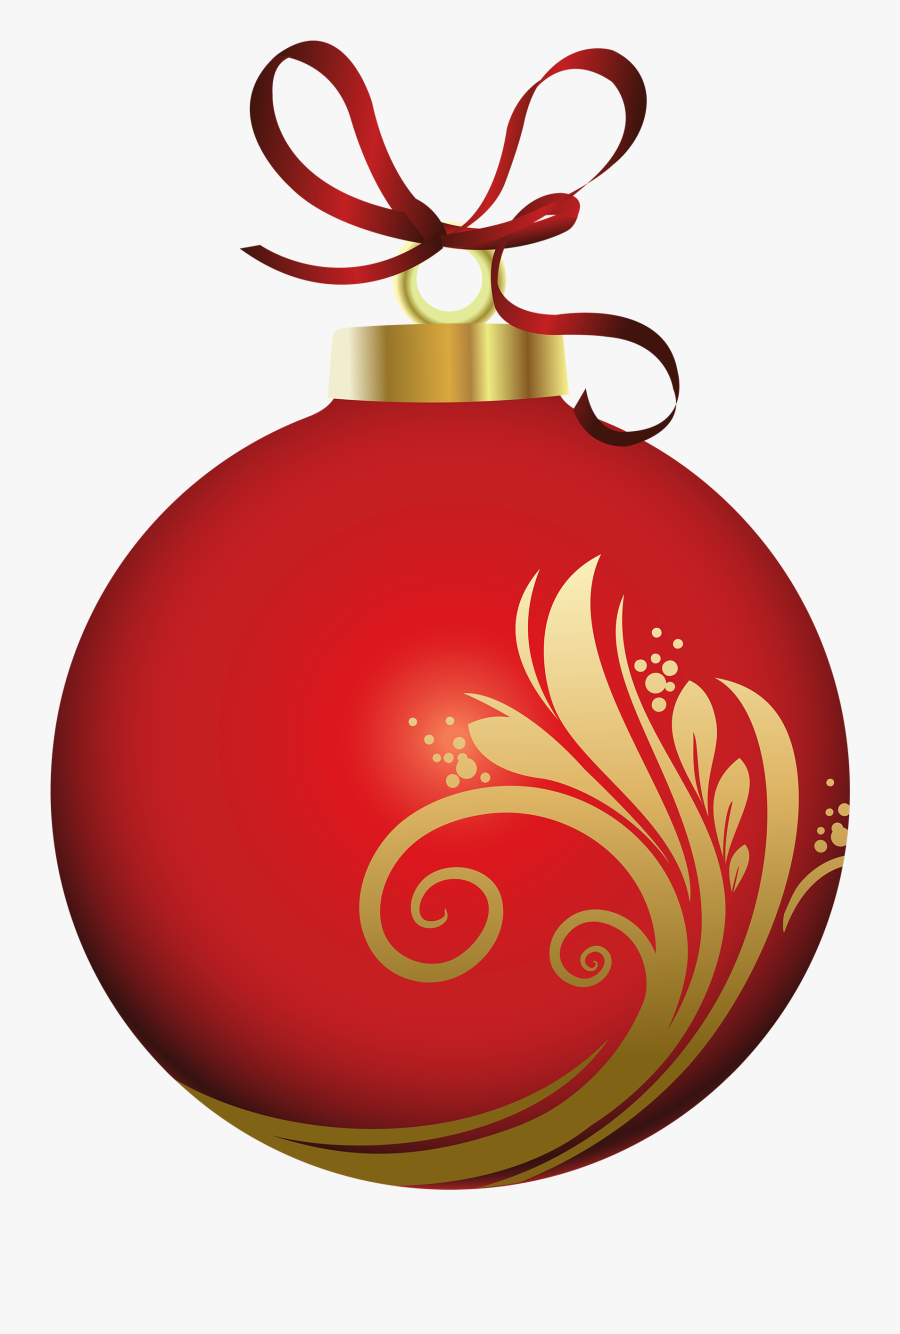 Christmas Ornament Clipart Png Red Christmas Ornament - Christmas Ball Decoration Png, Transparent Clipart